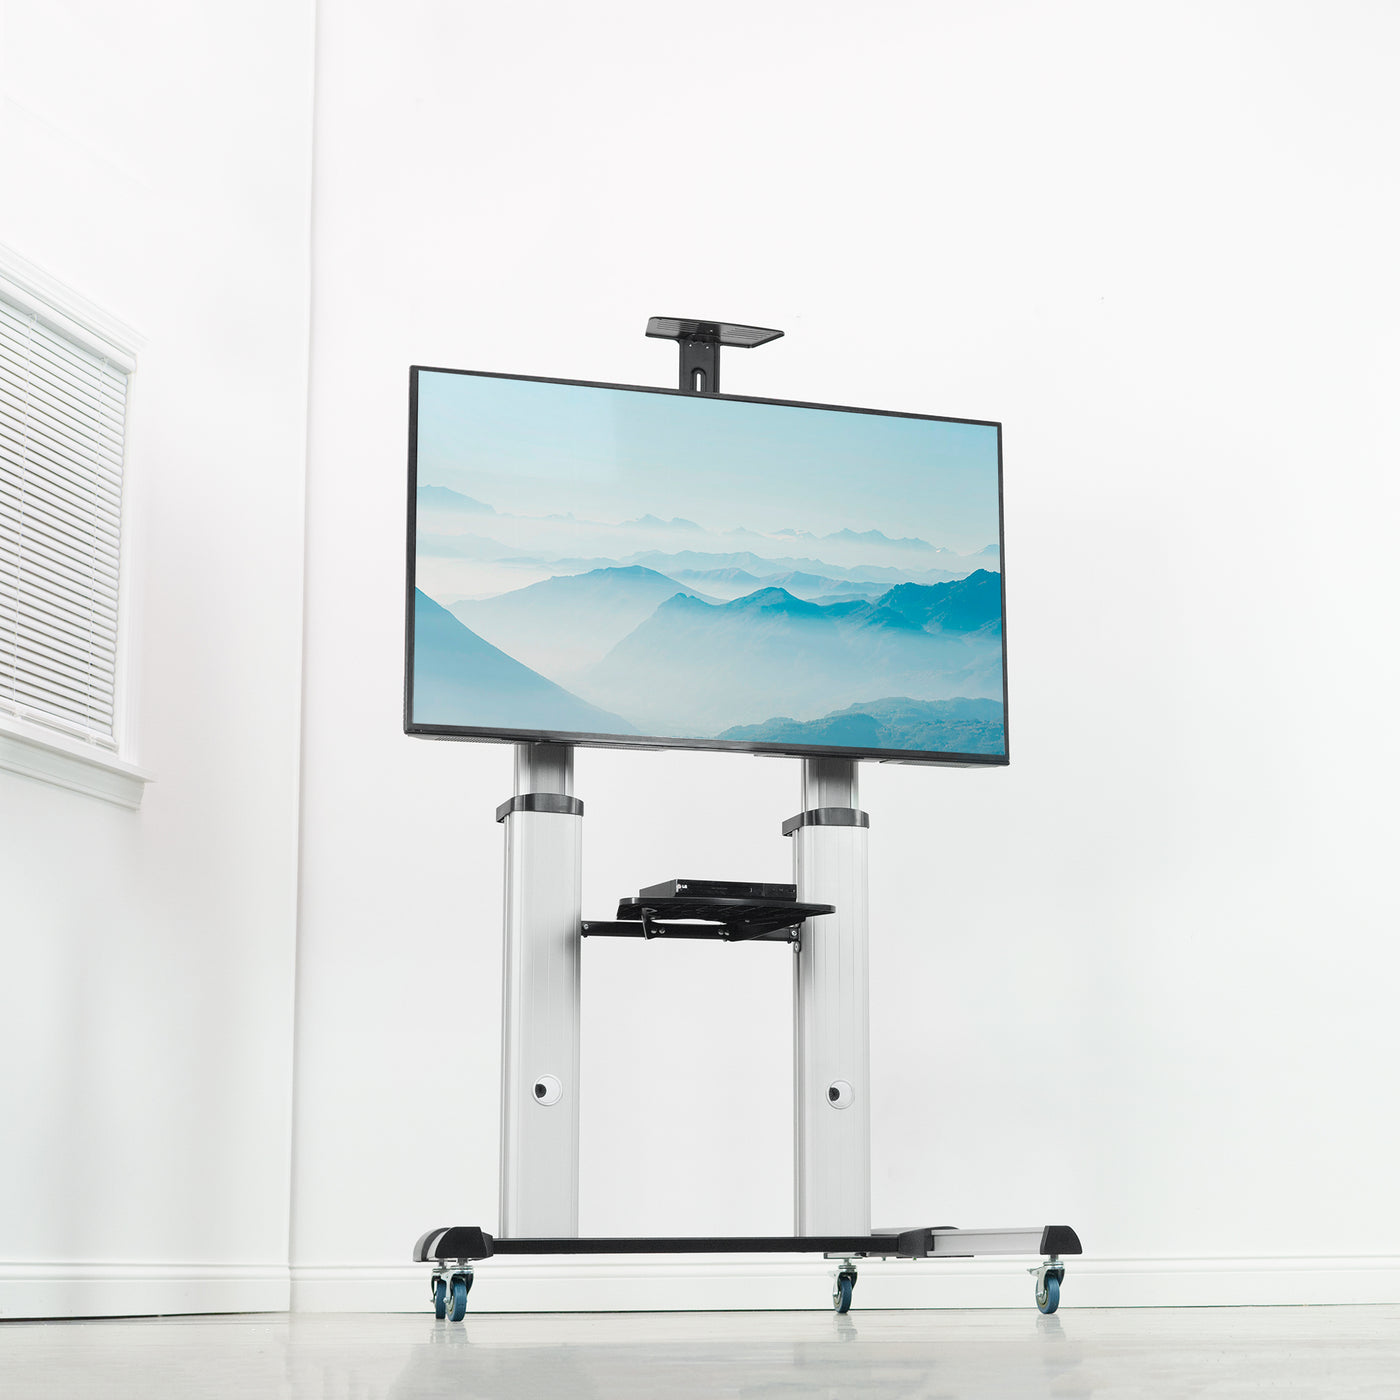 Large TV displayed on a modern TV cart in an empty white room.